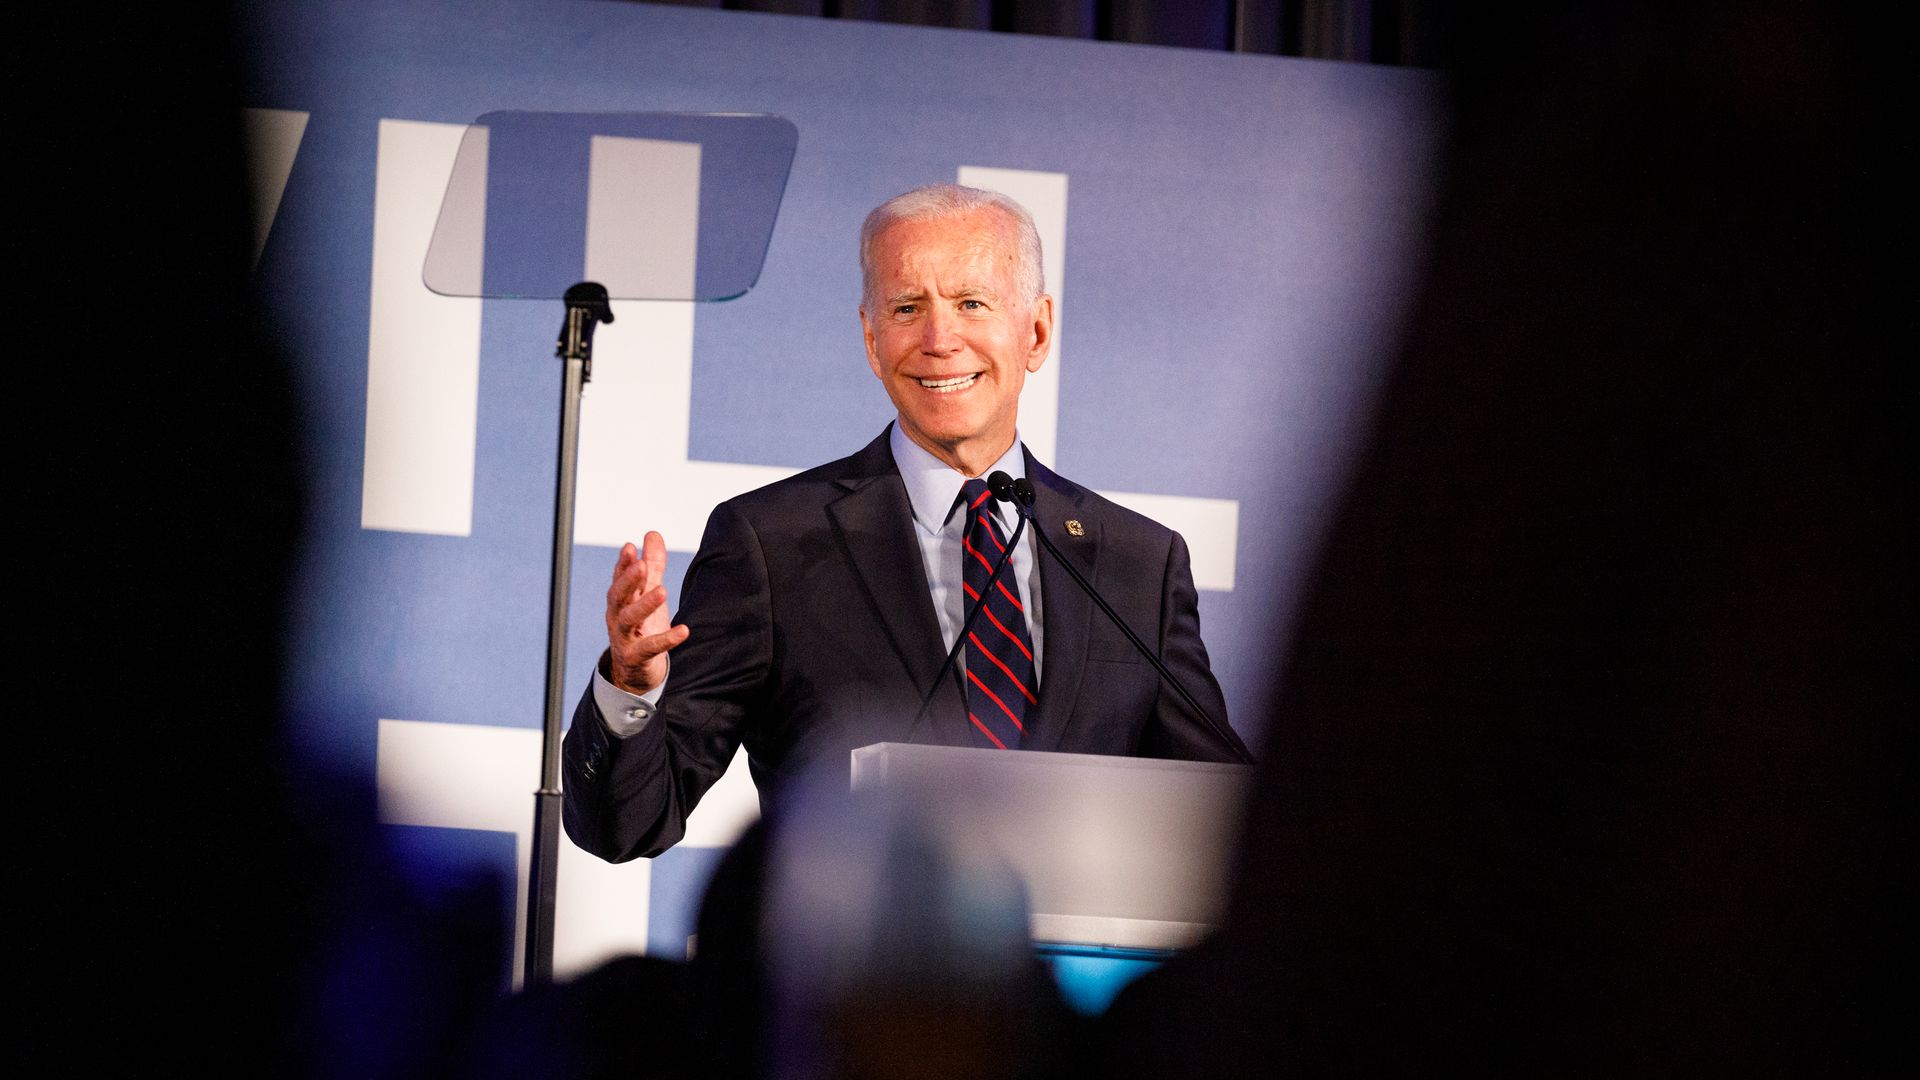 In this image, Biden stands framed by audience members at a podium